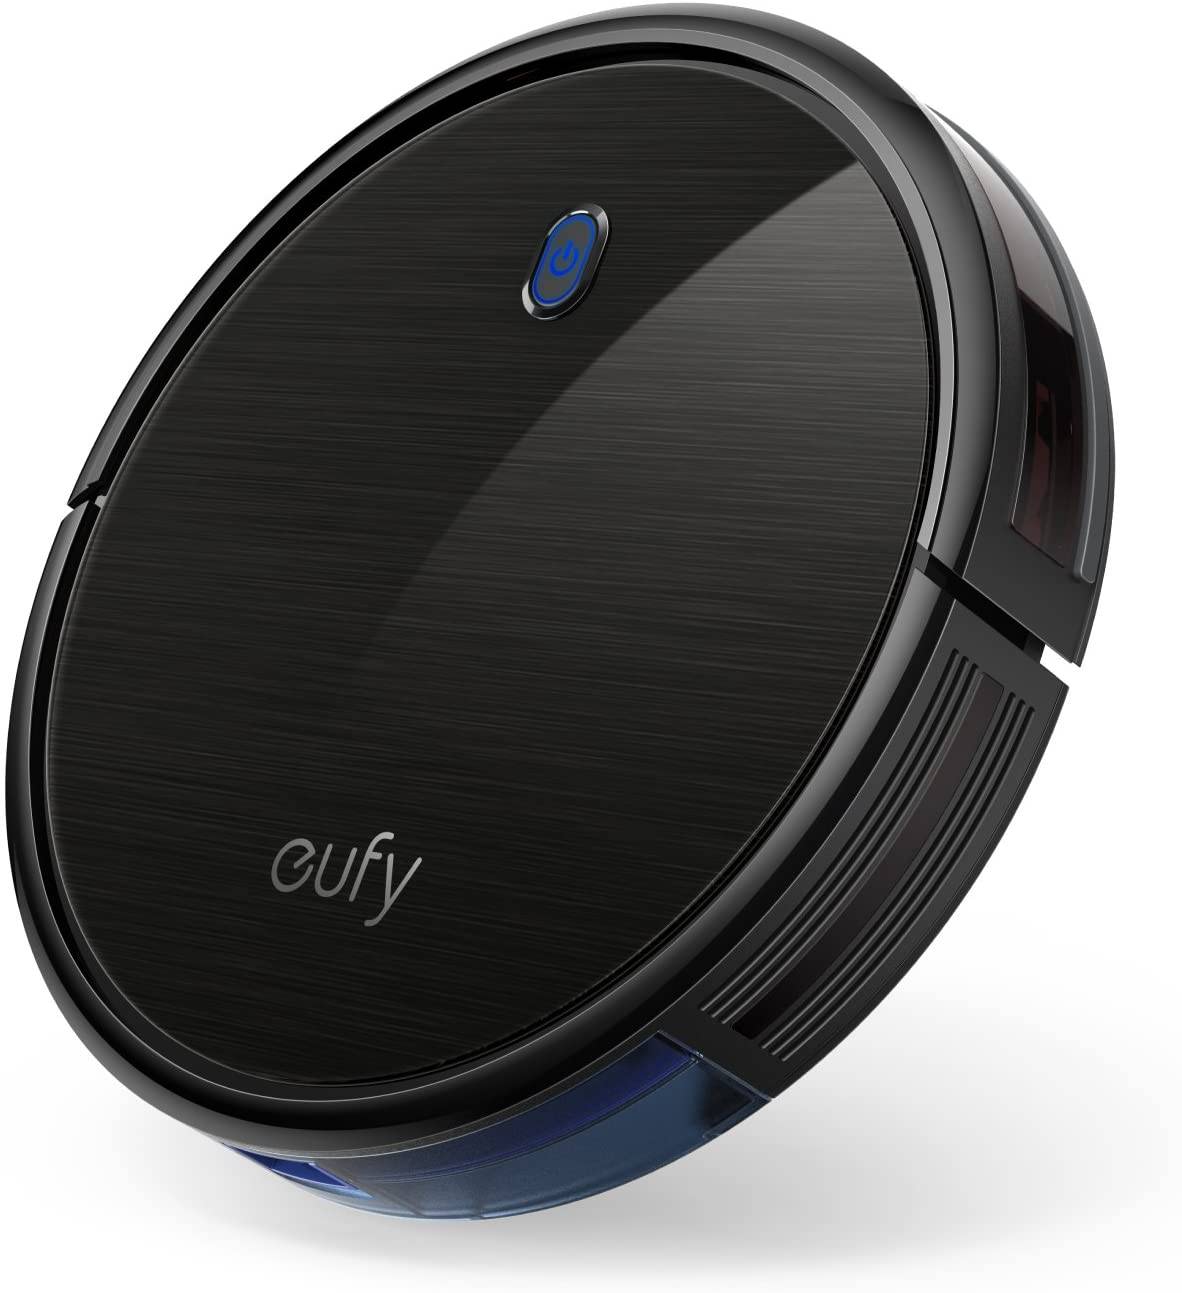 Robotic Vacuum Cleaner From Eufy Using BoostIQ Technology With Black Color, Vacuums for up to 100 minutes